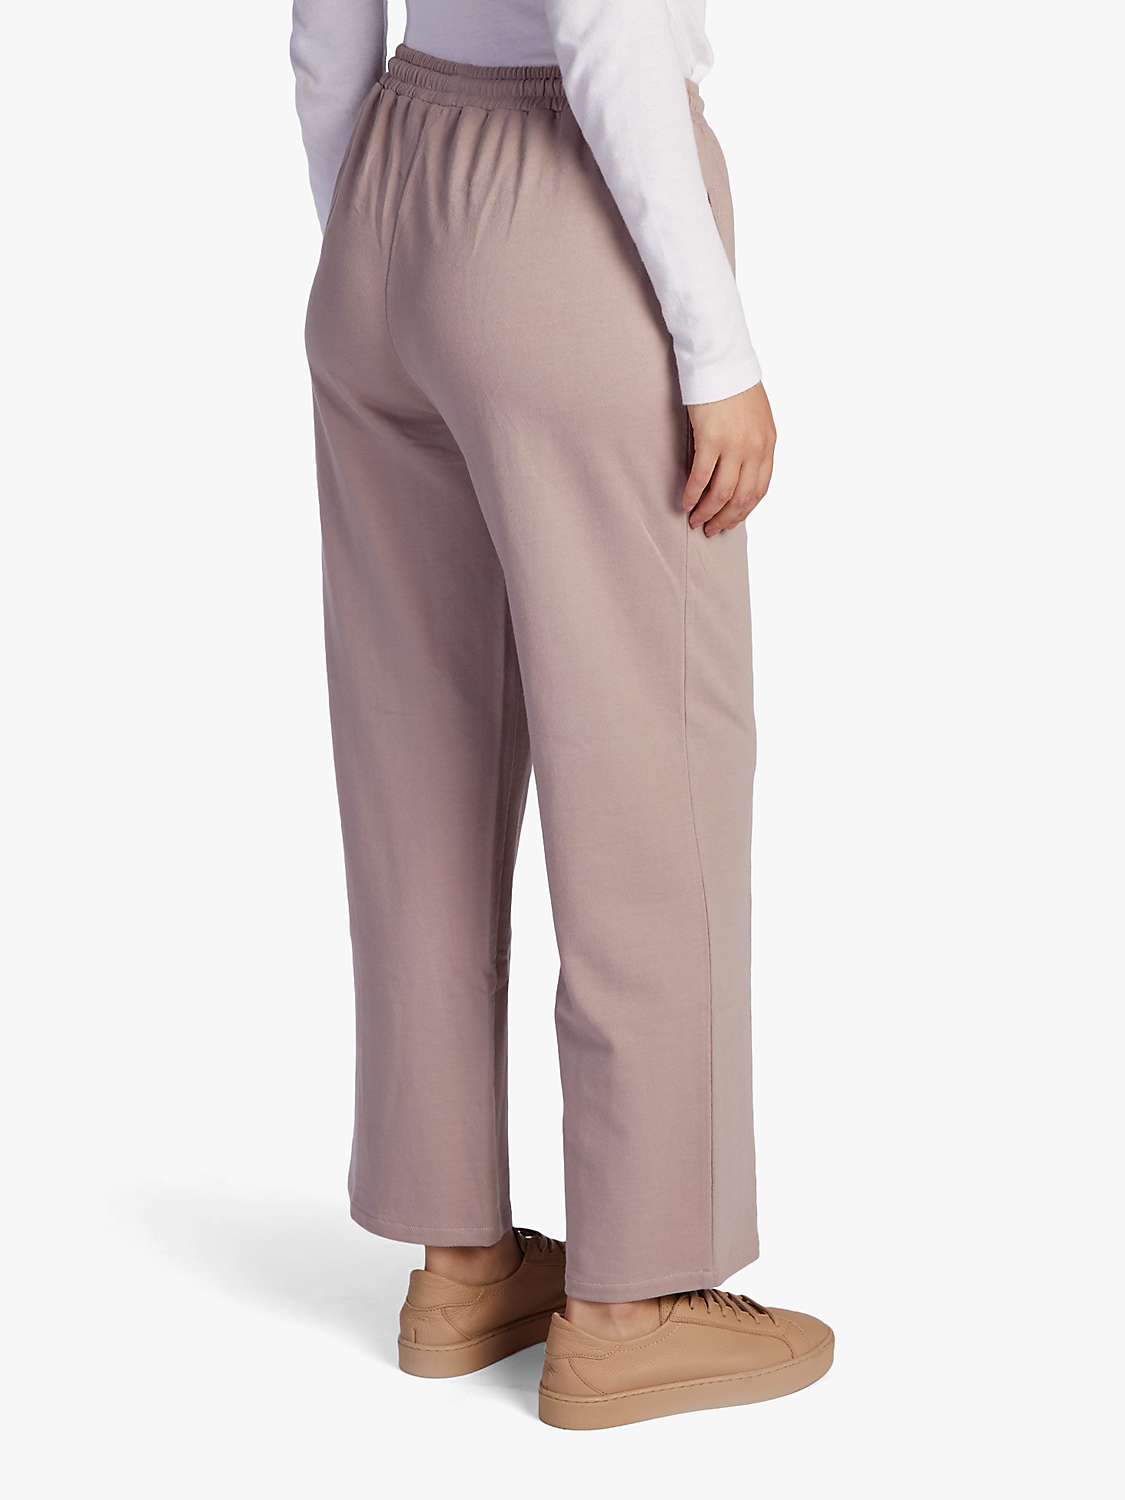 Buy Aab Loose Fit Cotton Joggers Online at johnlewis.com